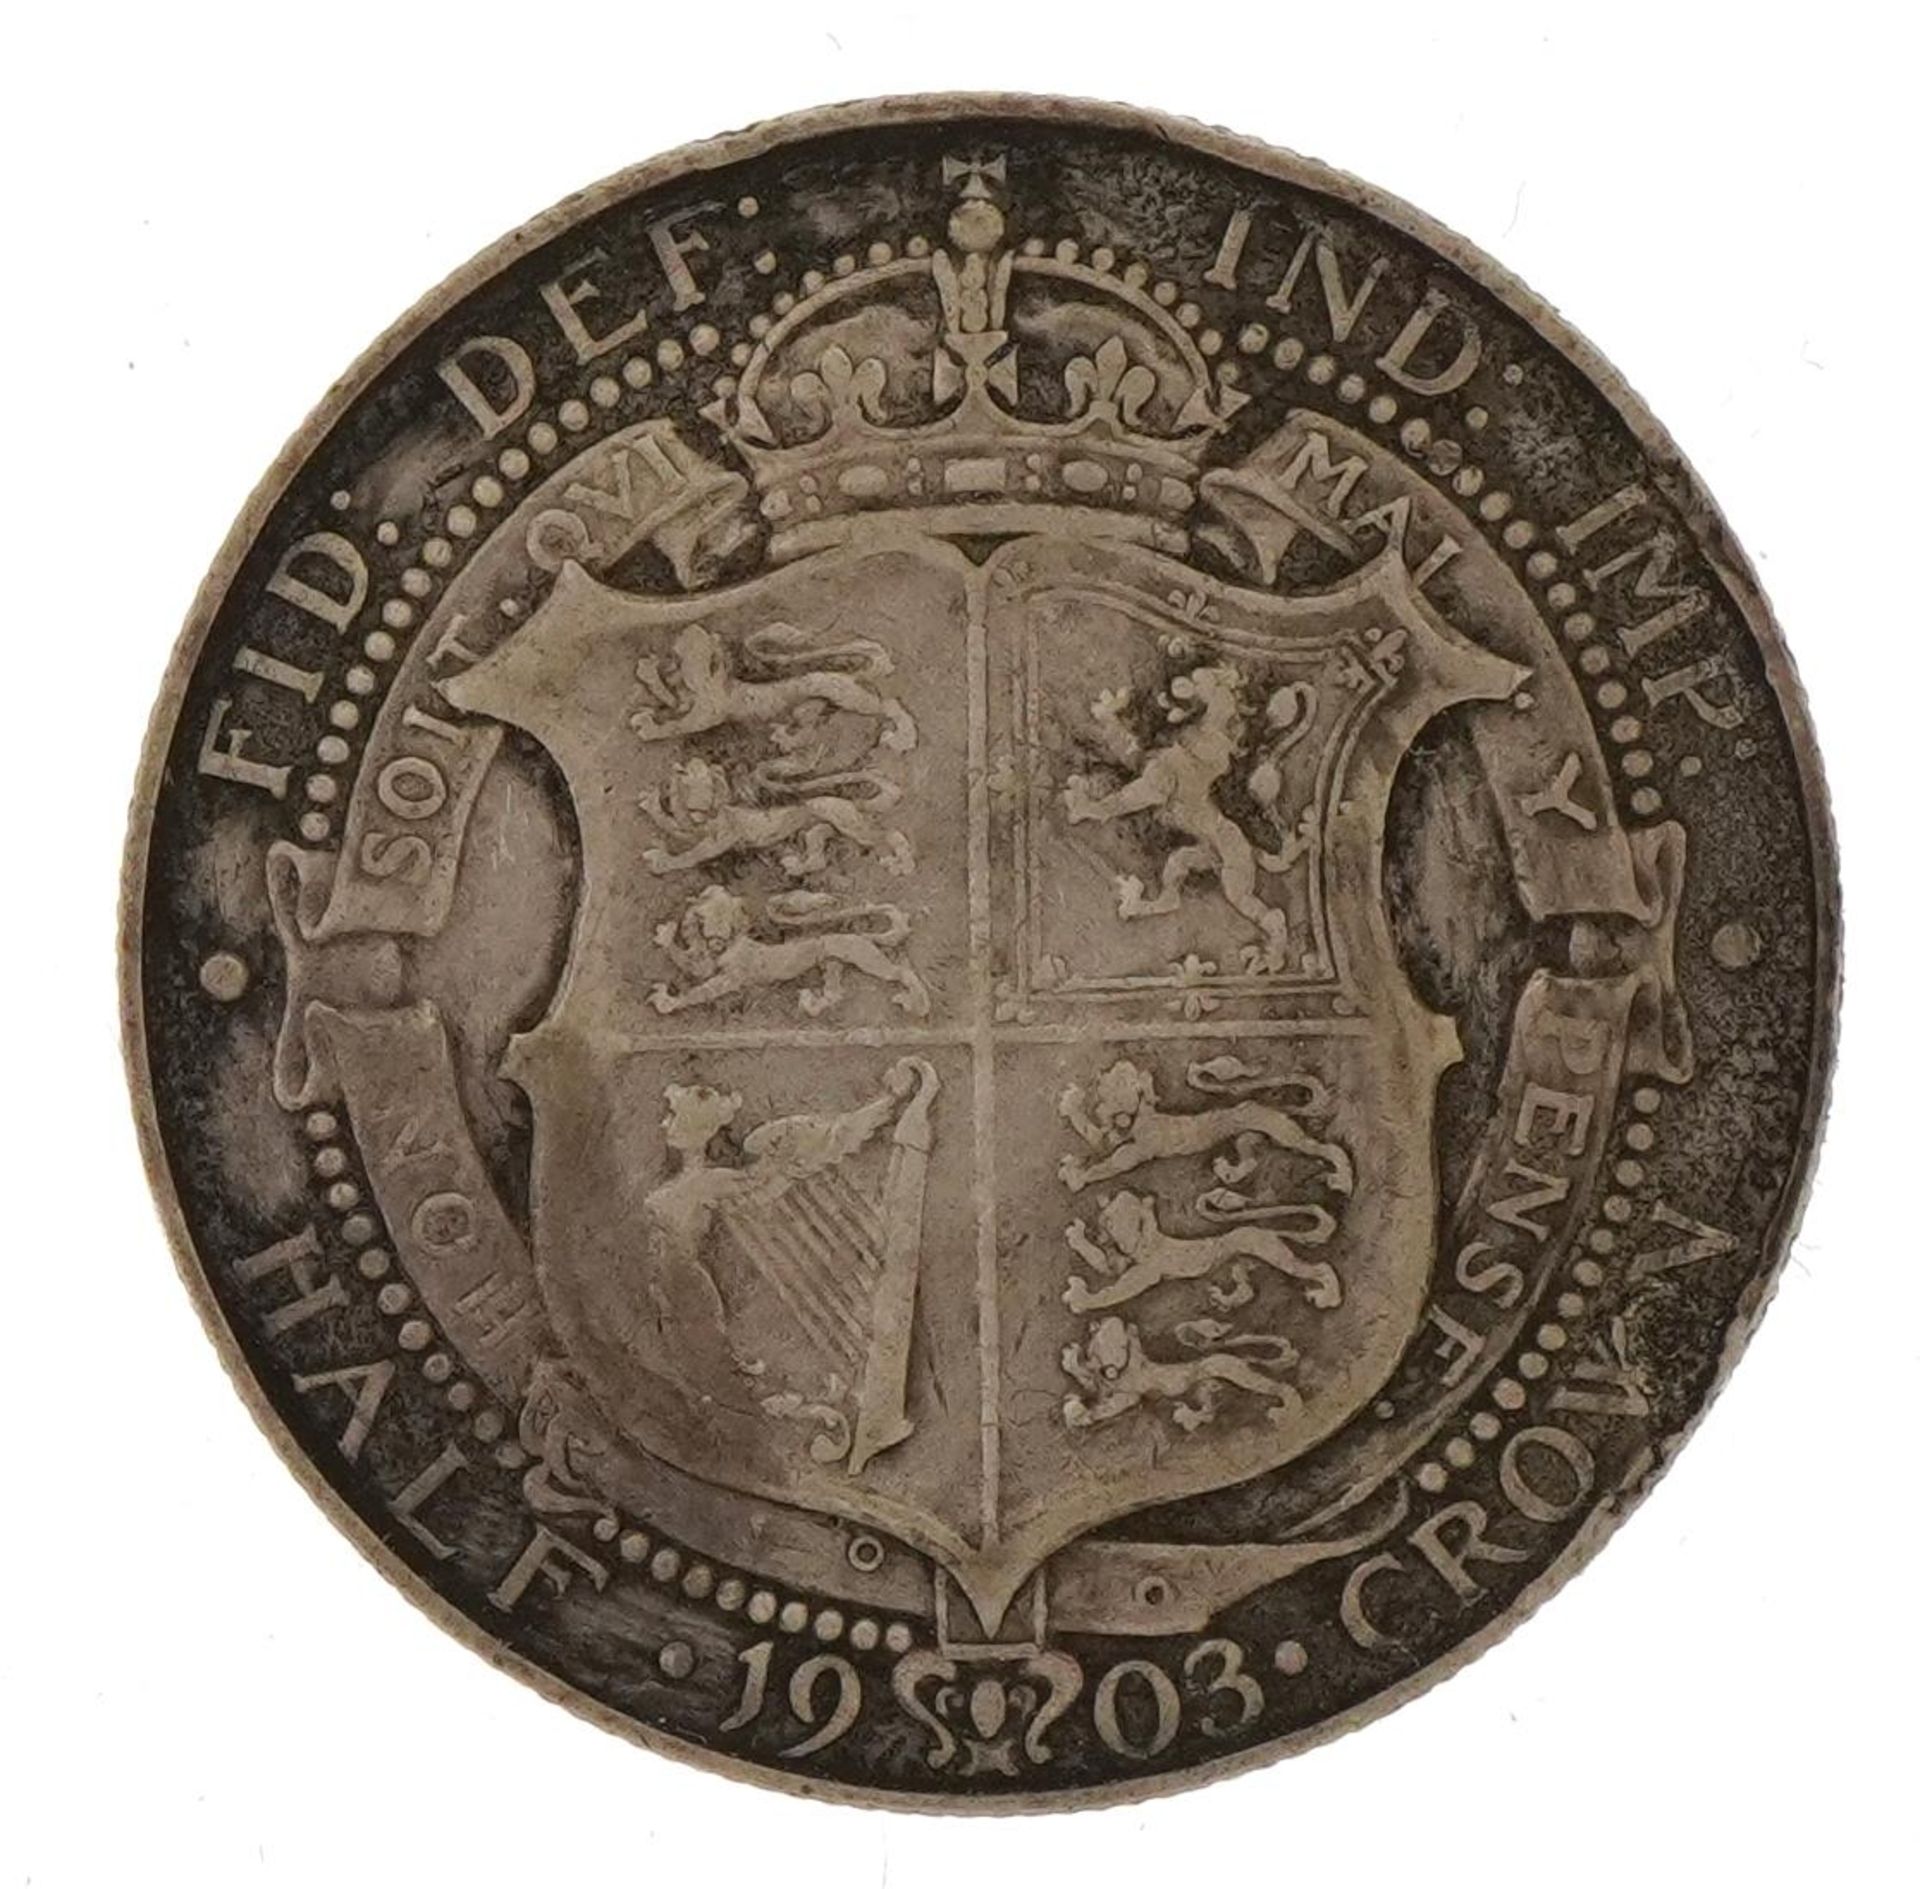 Edward VII 1903 half crown For further information on this lot please contact the auctioneer